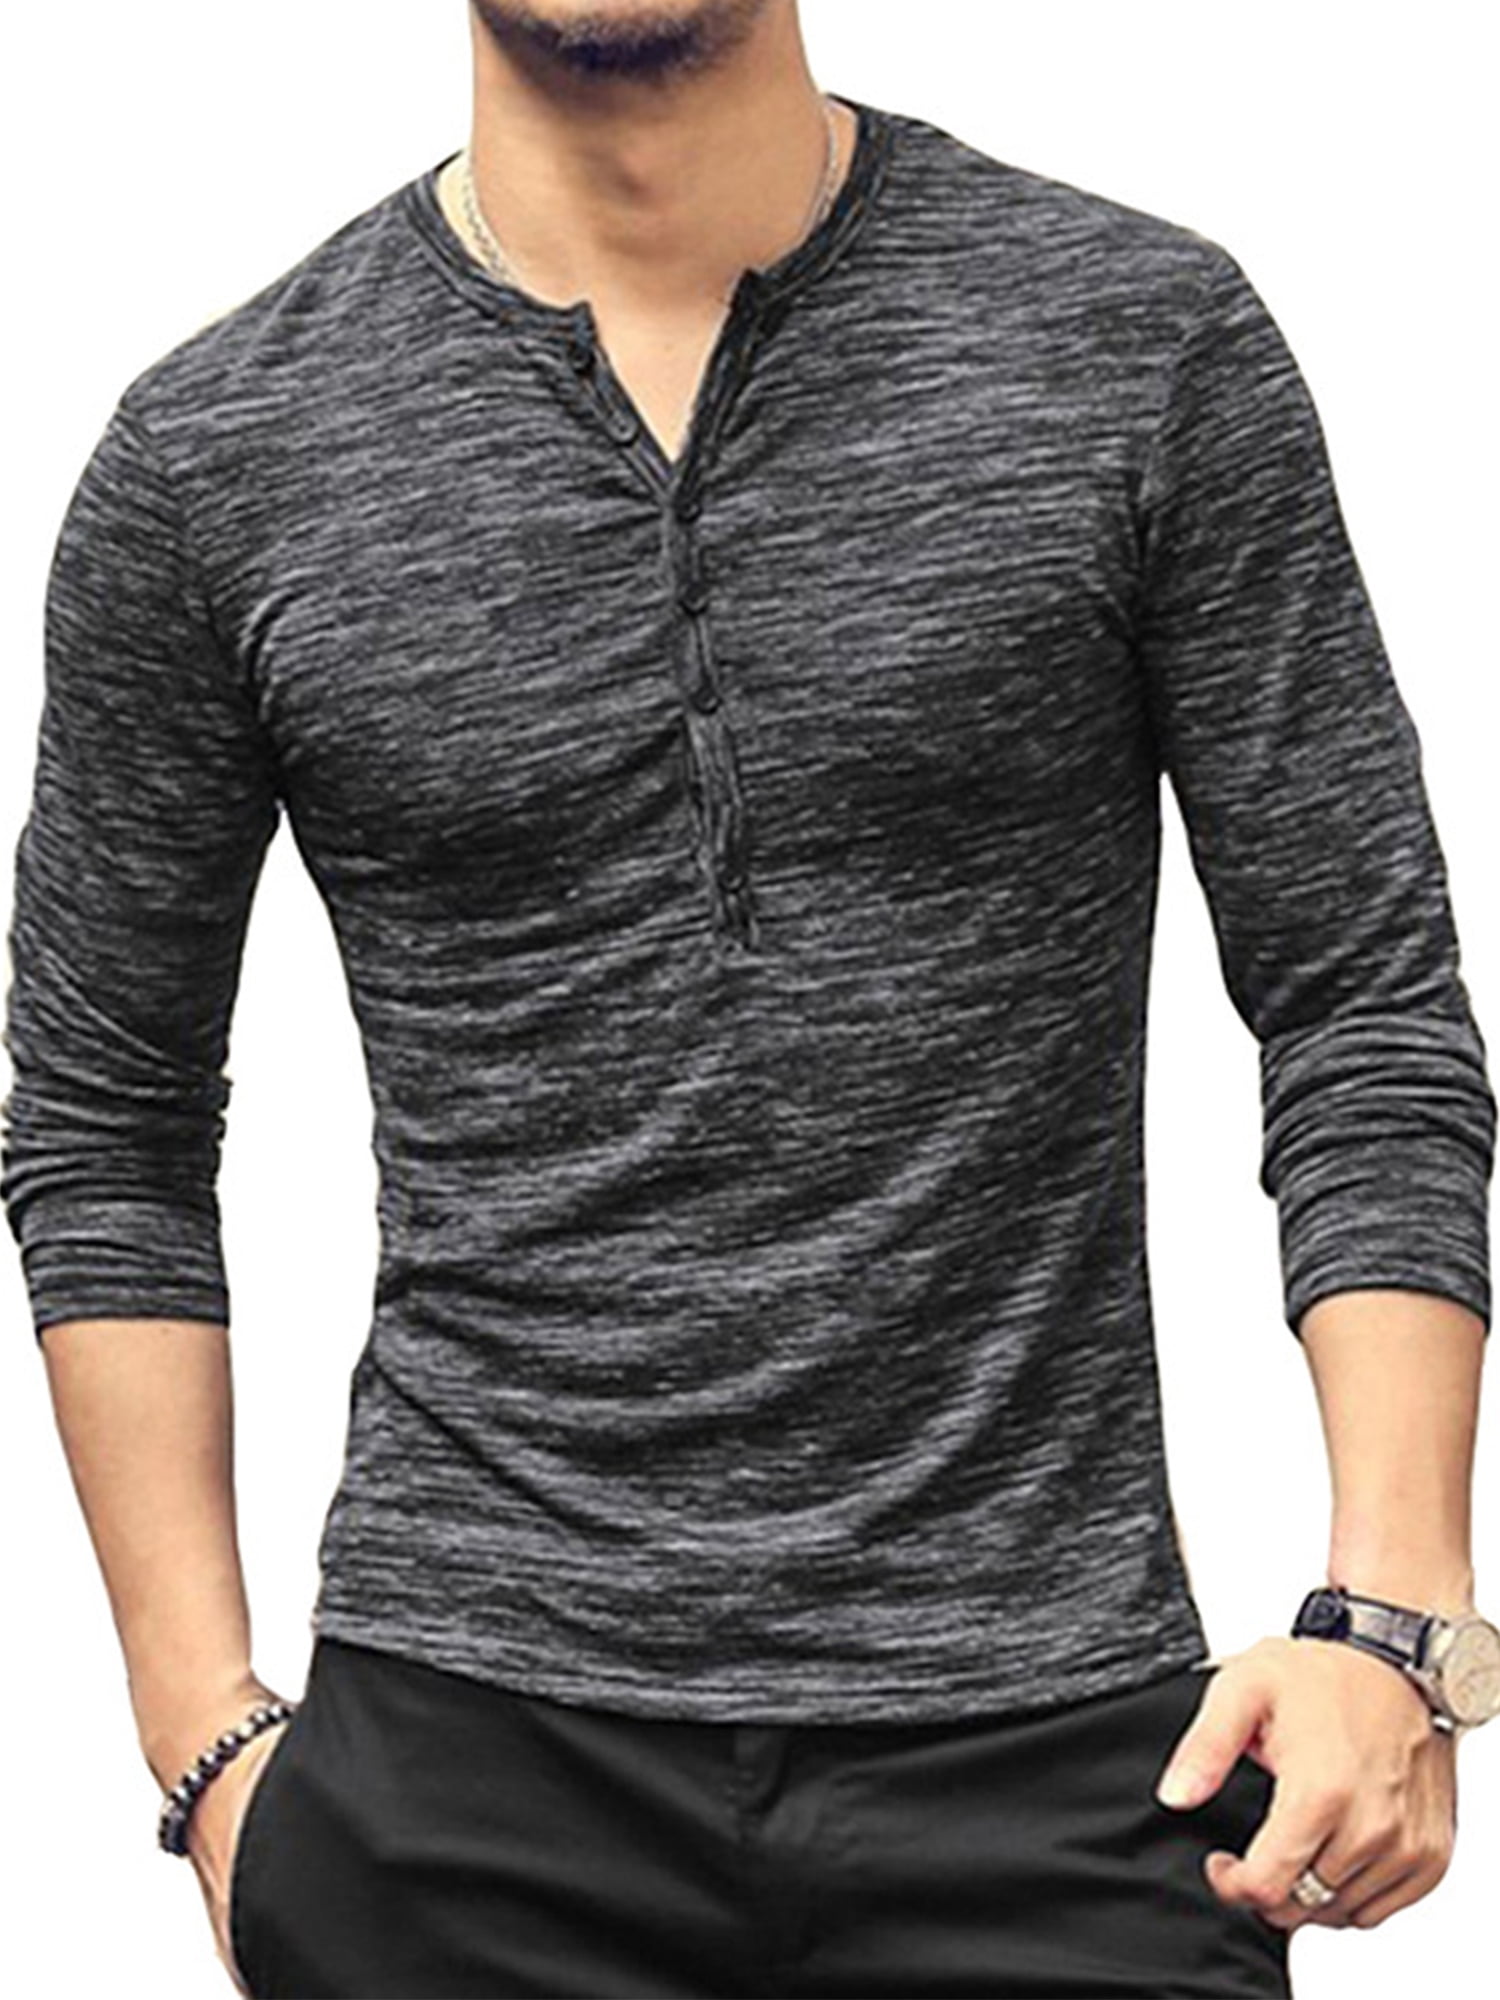 Men Cotton Long Sleeve Round Neck T Shirt Casual Tops Blouse Outdoor Muscle Tee